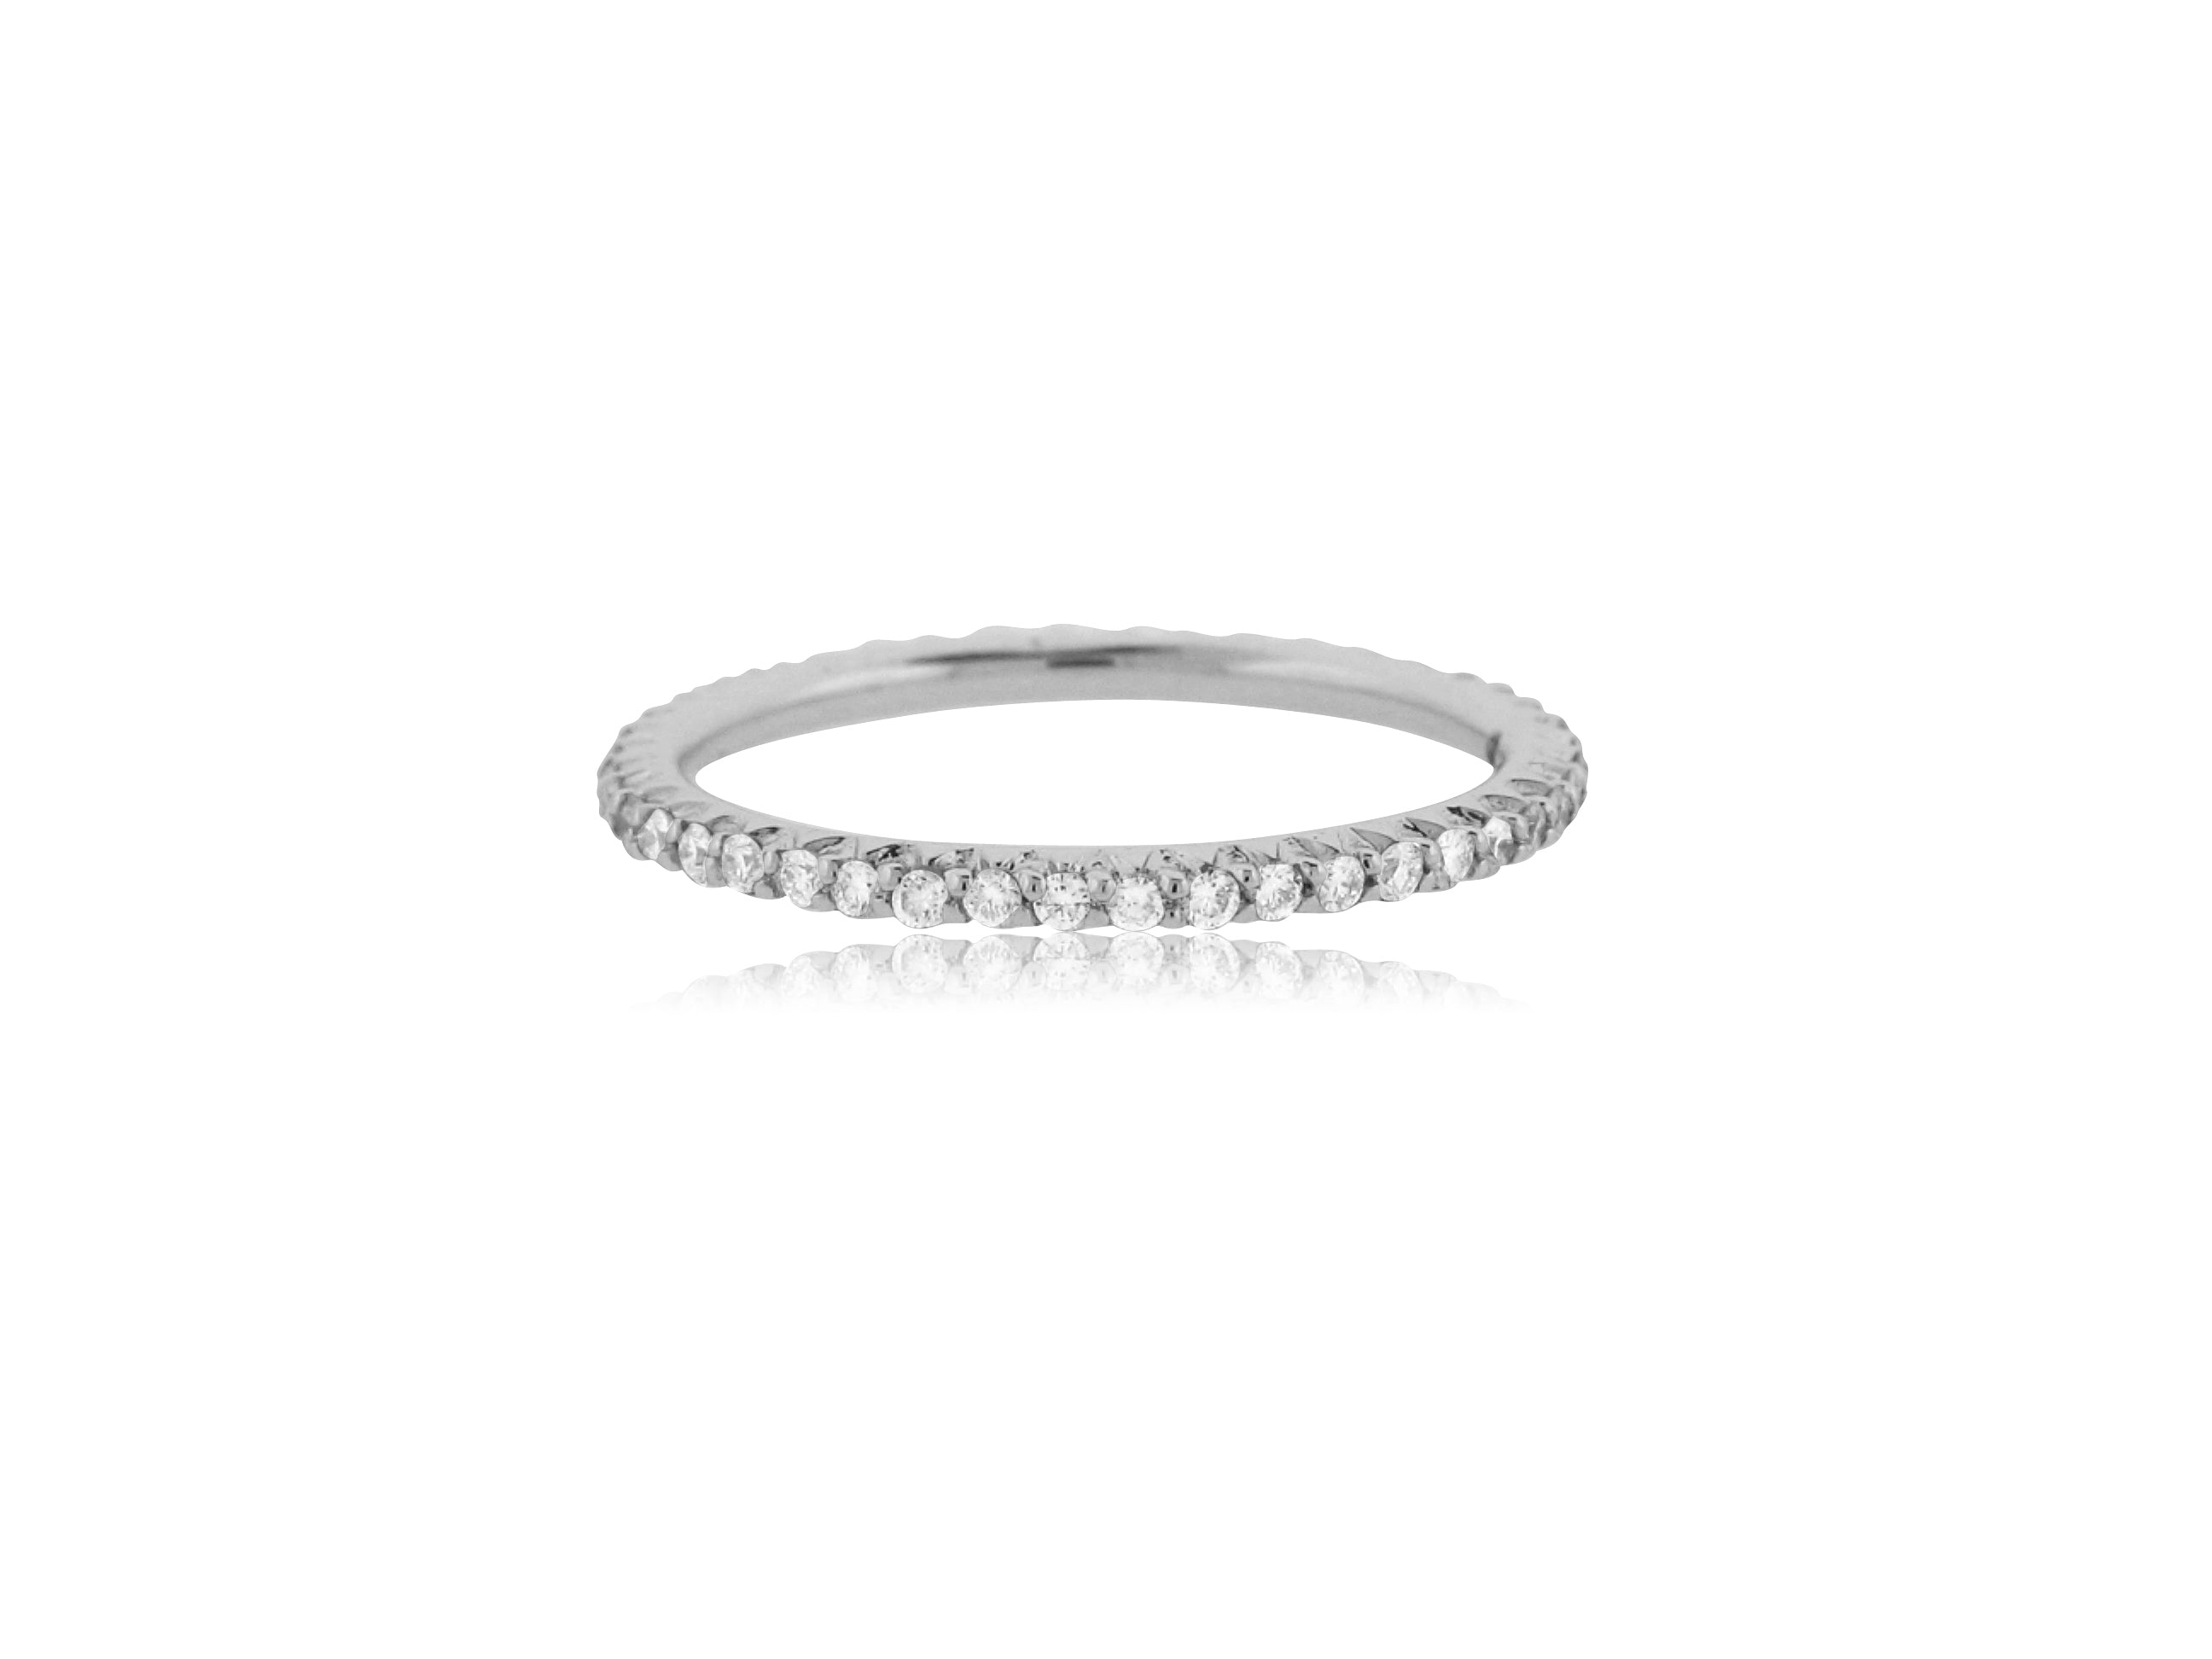 ROBERTO COIN 18K WHITE GOLD 0.37CT SI/G DIAMOND BAND FROM THE DIAMOND COLLECTION